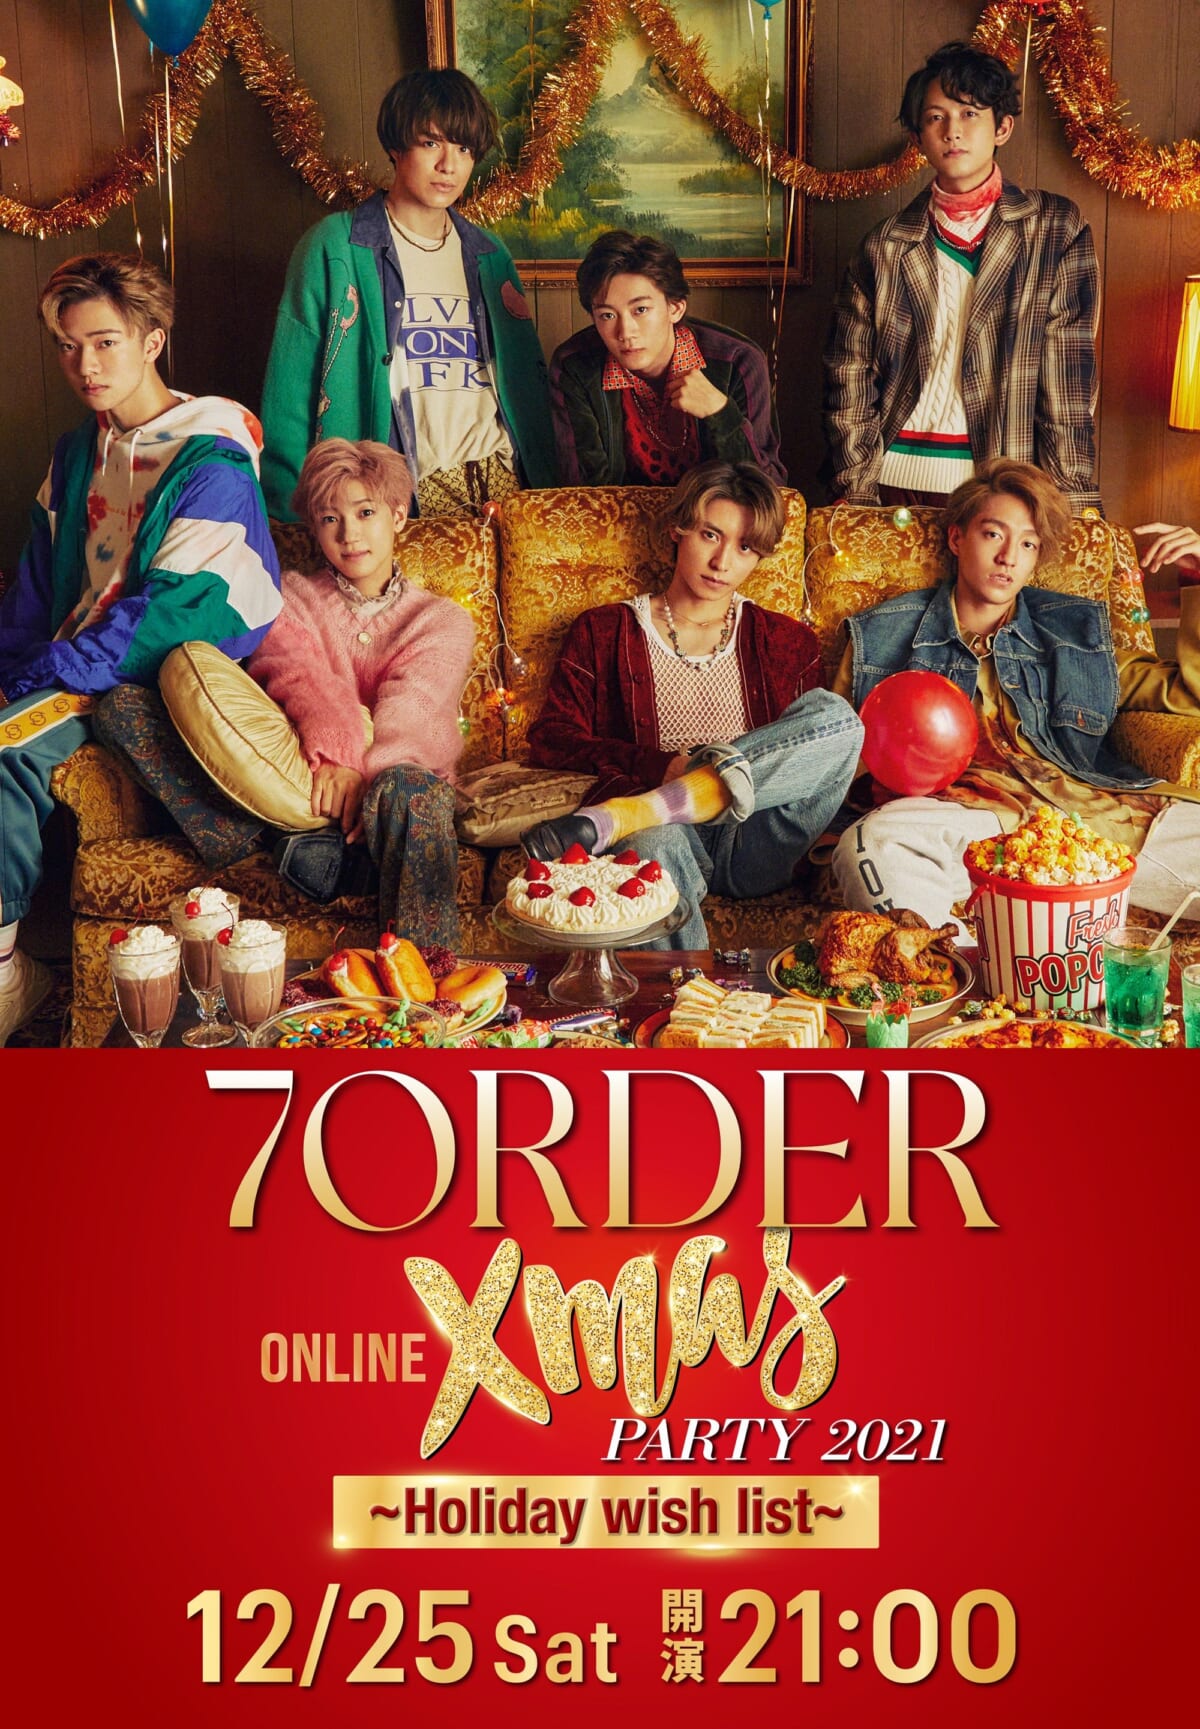 「7ORDER ONLINE Xmas Party 2021 ～Holiday wish list～」